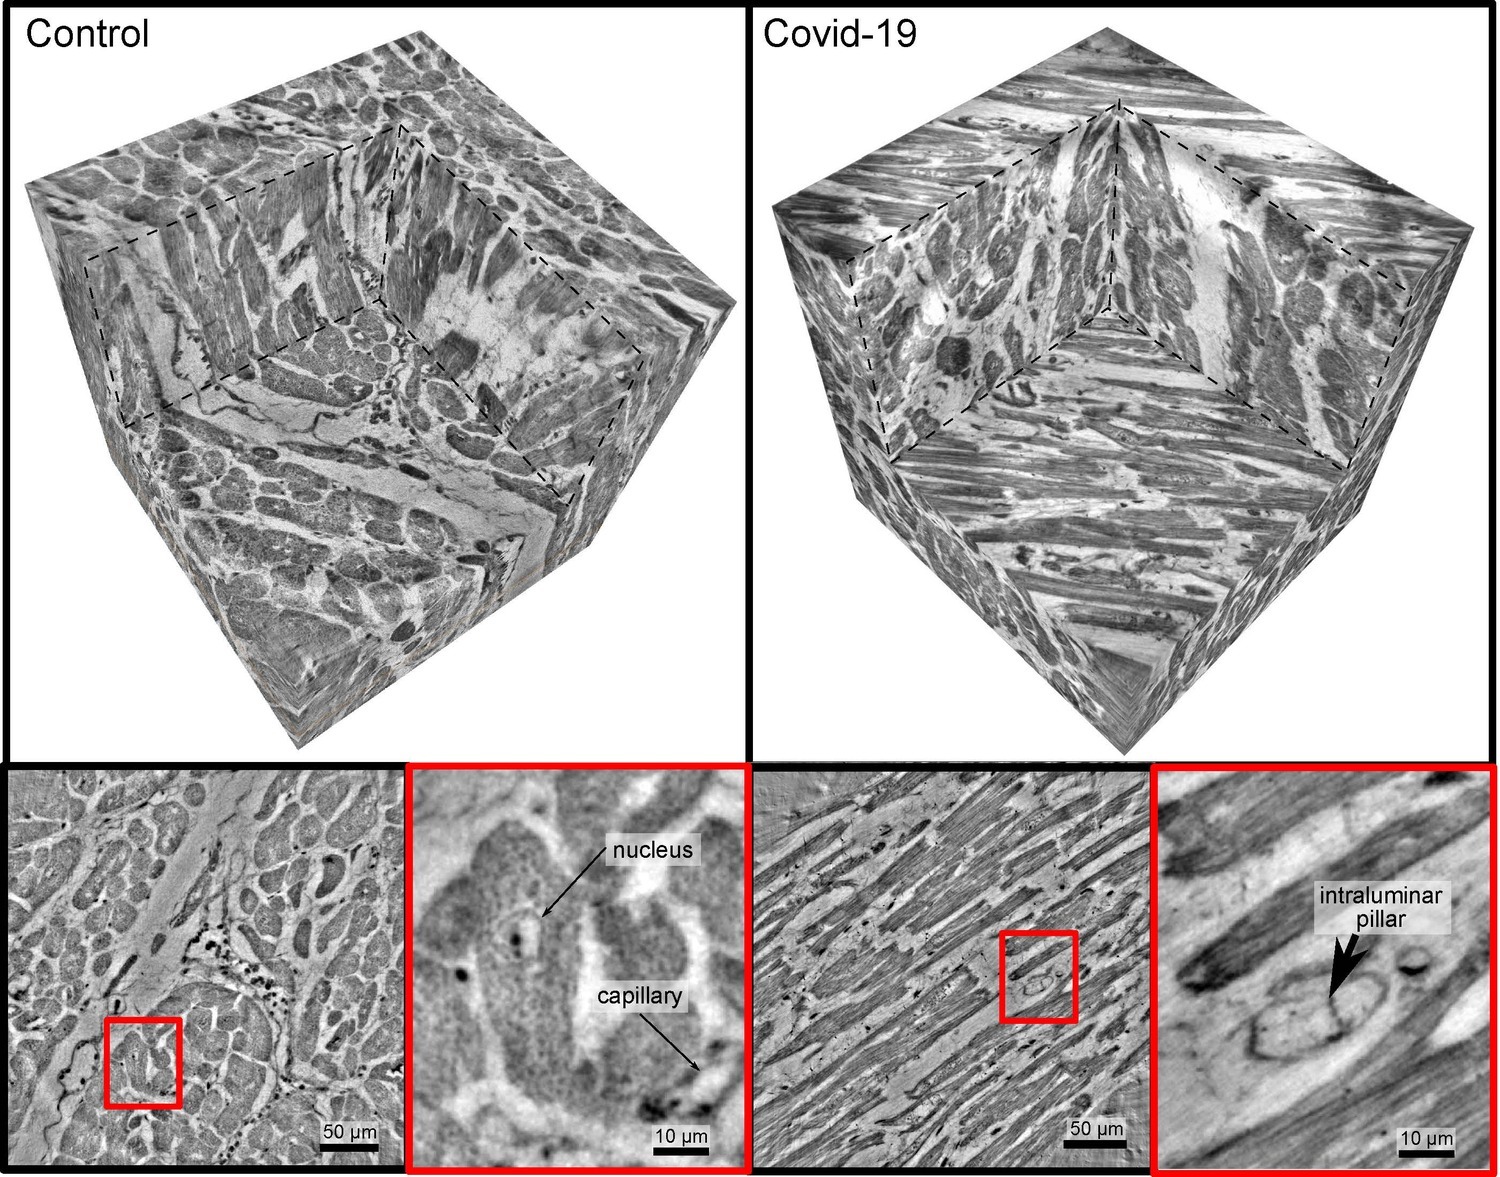 Healthy heart tissue (left) and in severe Covid-19 (right). While the blood vessels in the healthy case show an intact structure (bottom right), one can see cavities or pouches and tiny tubular structures forming in the fine blood vessels (capillaries) in the Covid-19 tissue sample, which indicate particular morphological changes.